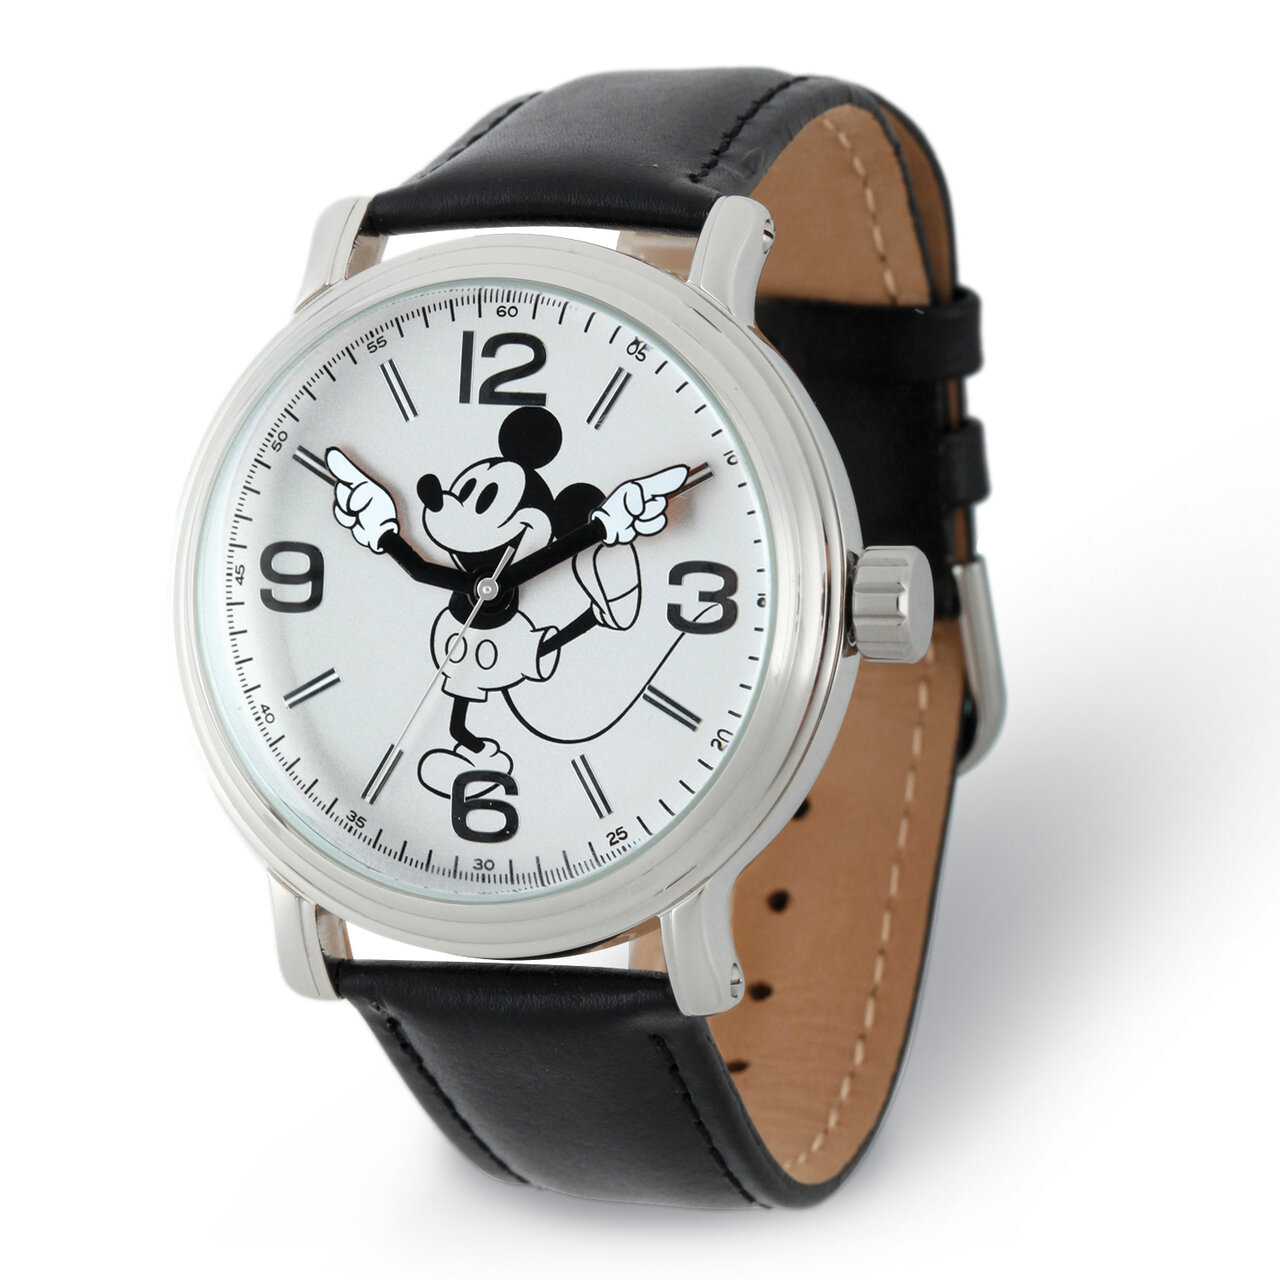 Disney Adult Size Black Strap Mickey Mouse with Moving Arms Watch XWA5752